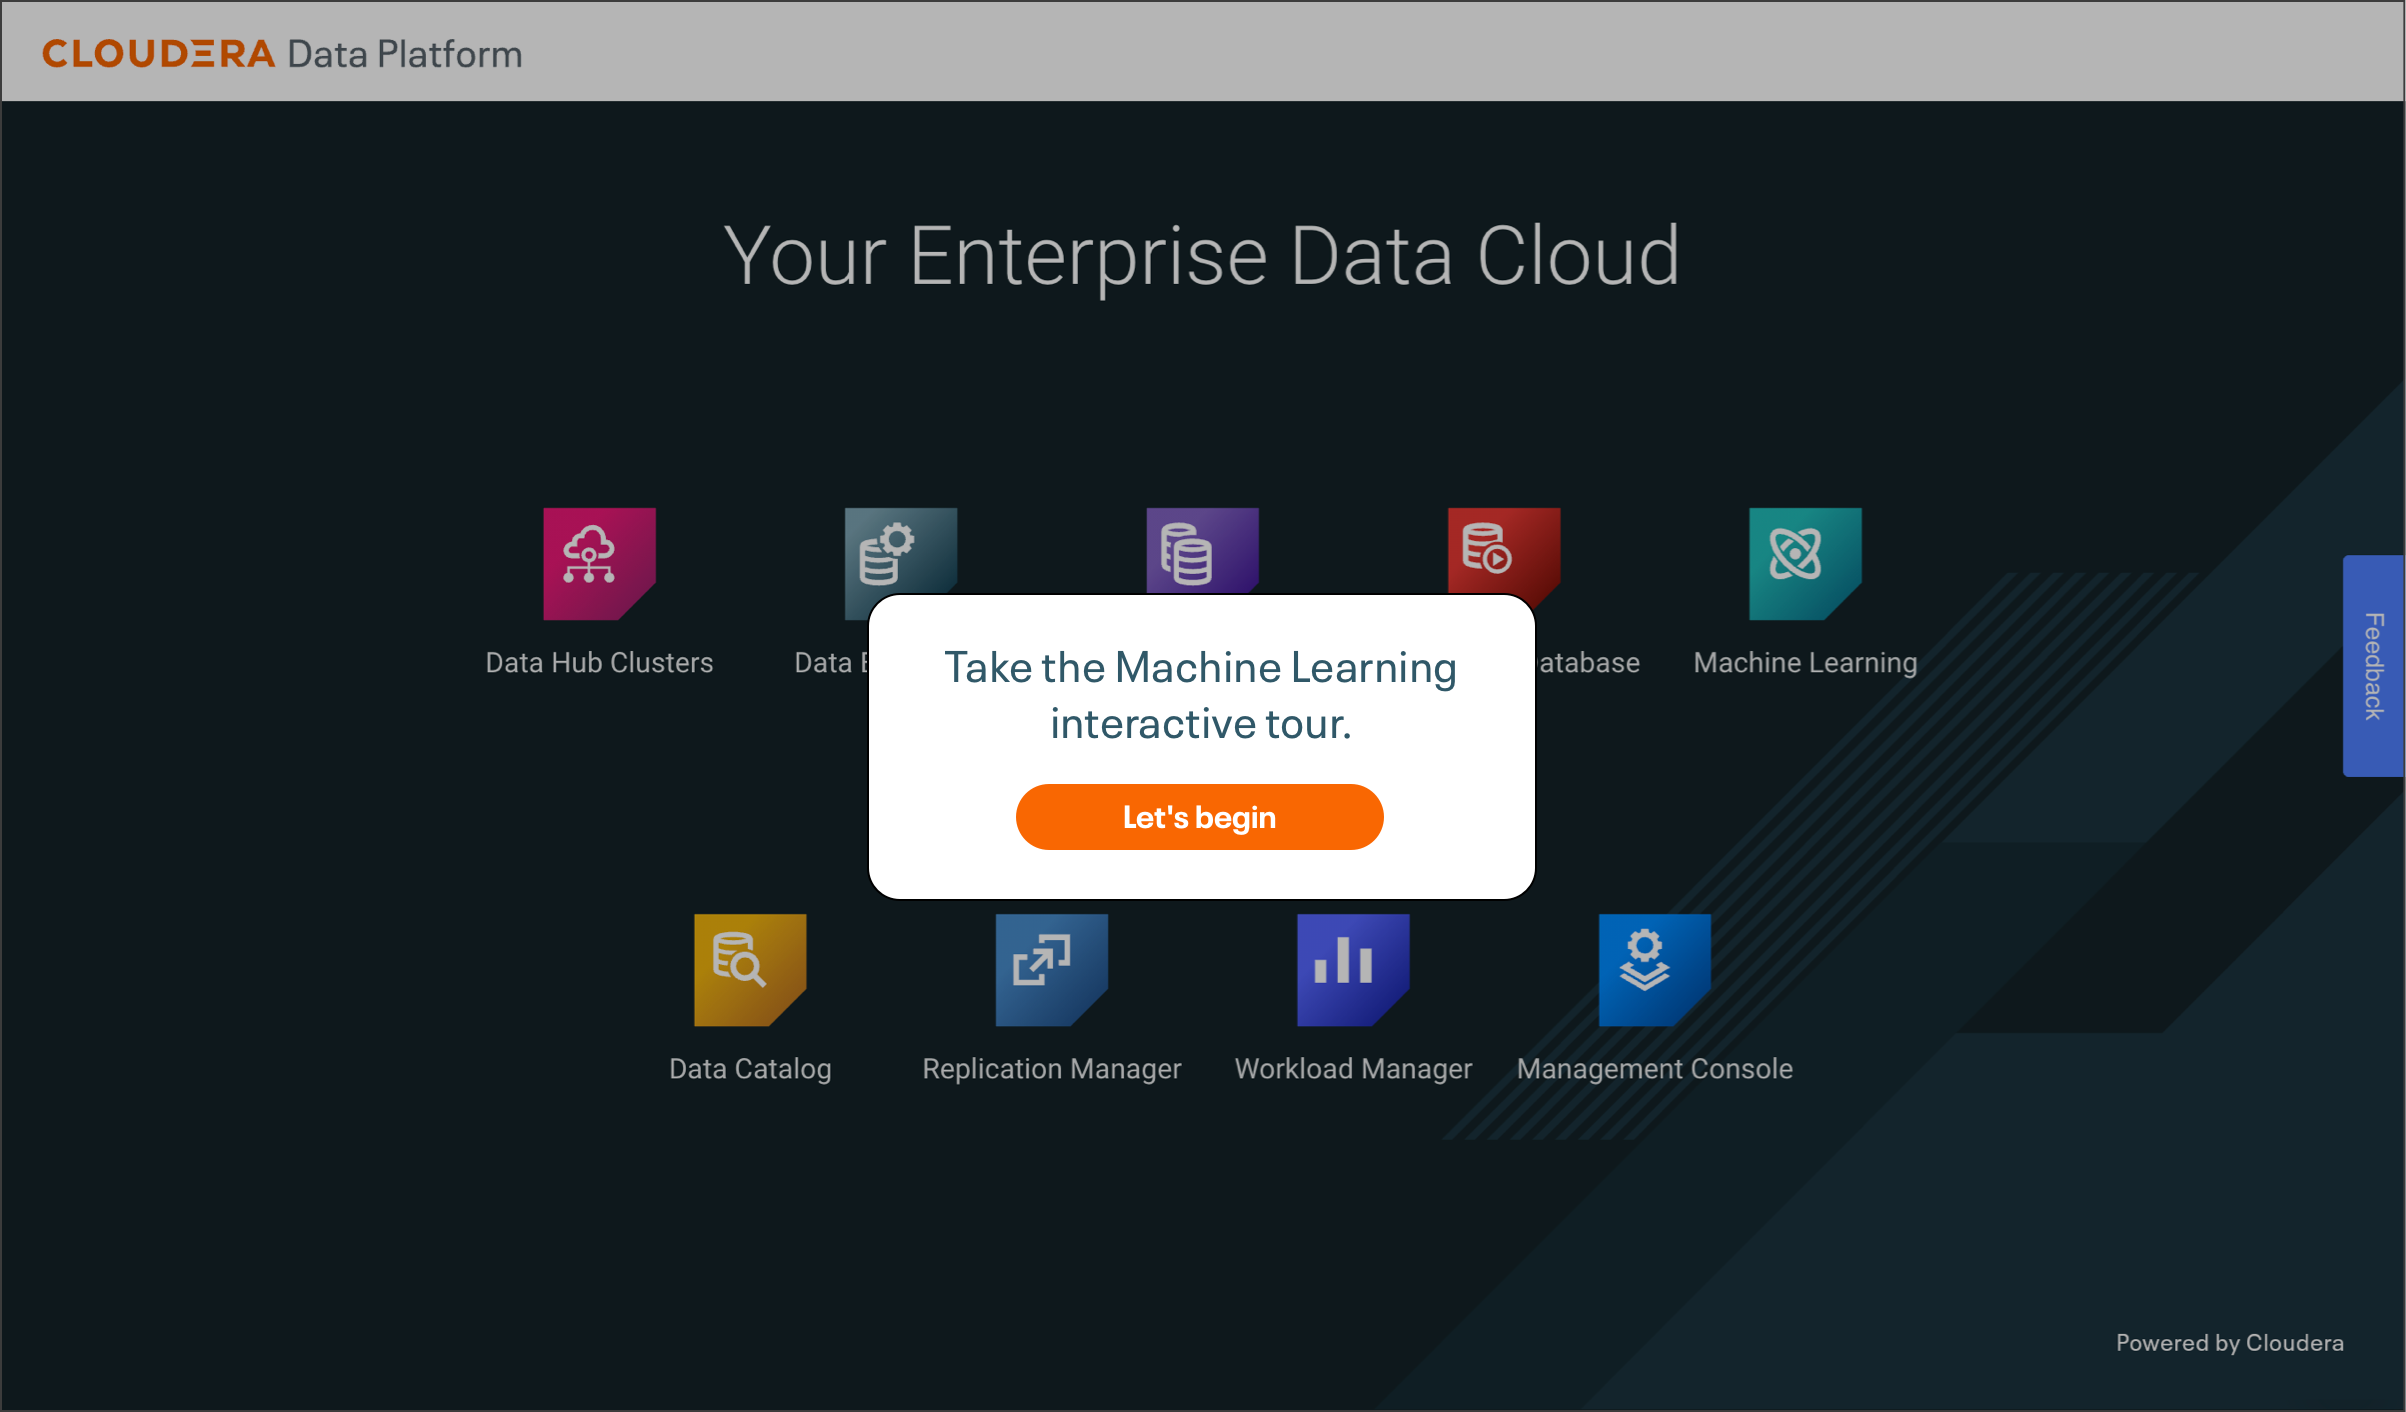 Take the interactive tour of Machine Learning